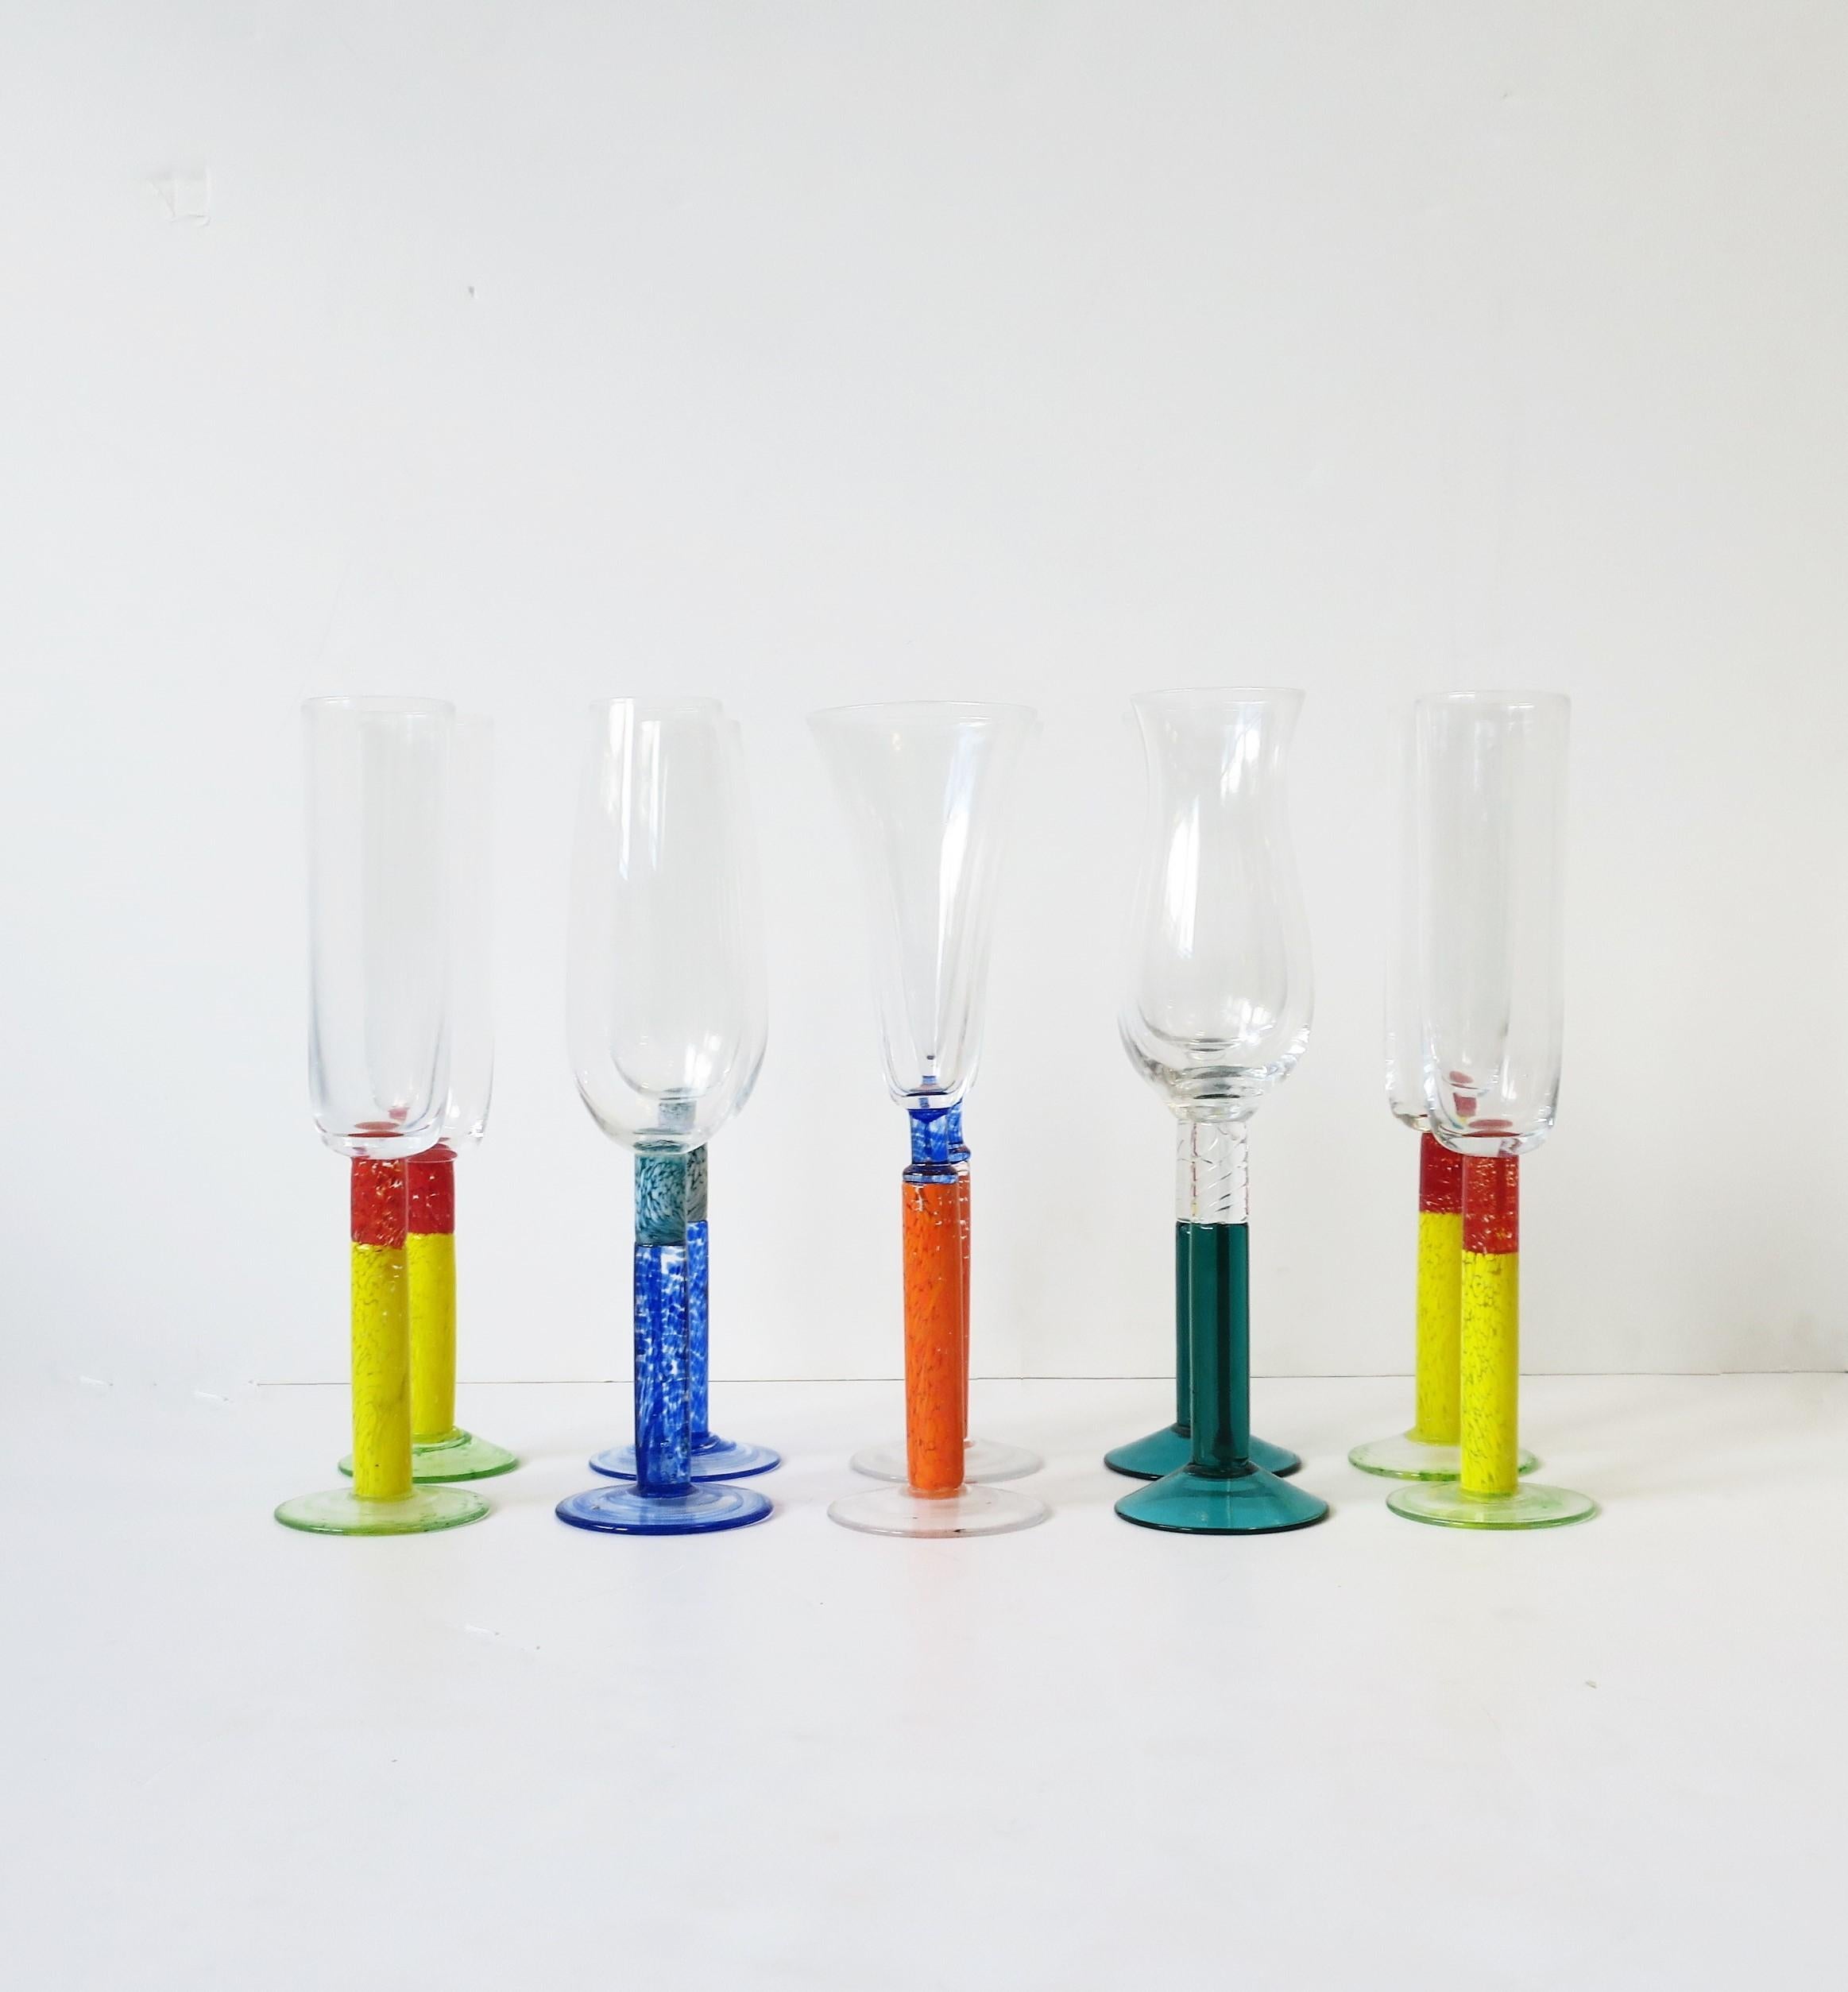 A beautiful set of ten (10) colorful art glass Champagne flute glasses, circa 1990s, Europe. In the style of Kosta Boda, Sweden. Colors include: Red, yellow, orange, blue, teal blue/blue-green. A beautiful set for home, summer, holiday entertaining